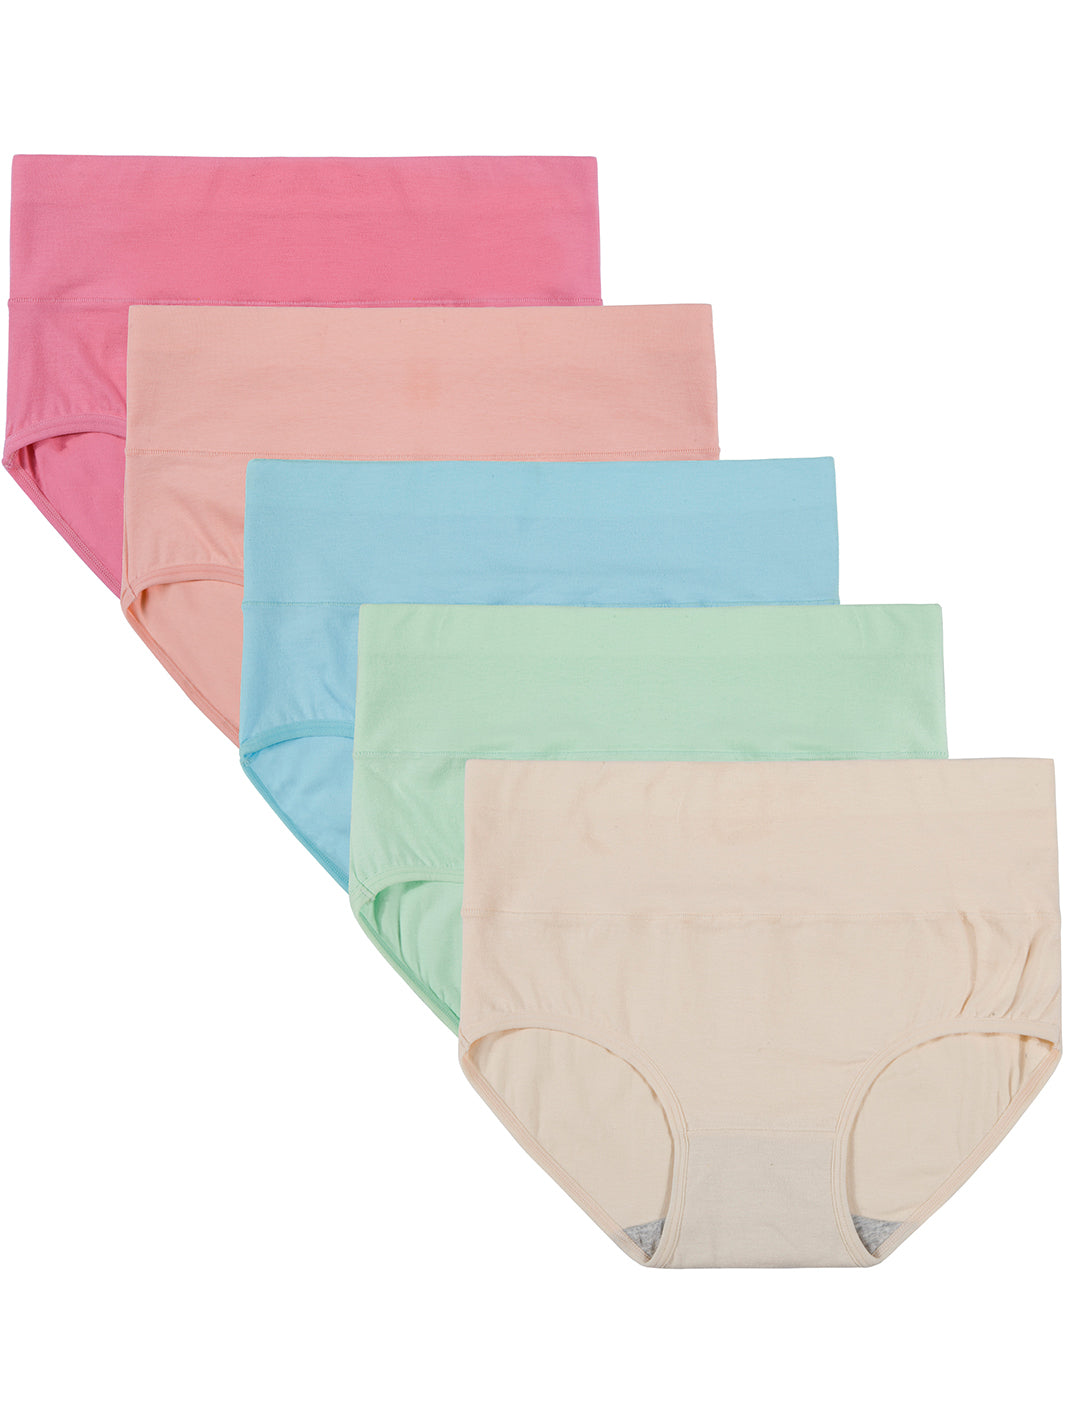 INNERSY Womens Thongs Underwear Cotton Sporty Thong Panties 5-Pack